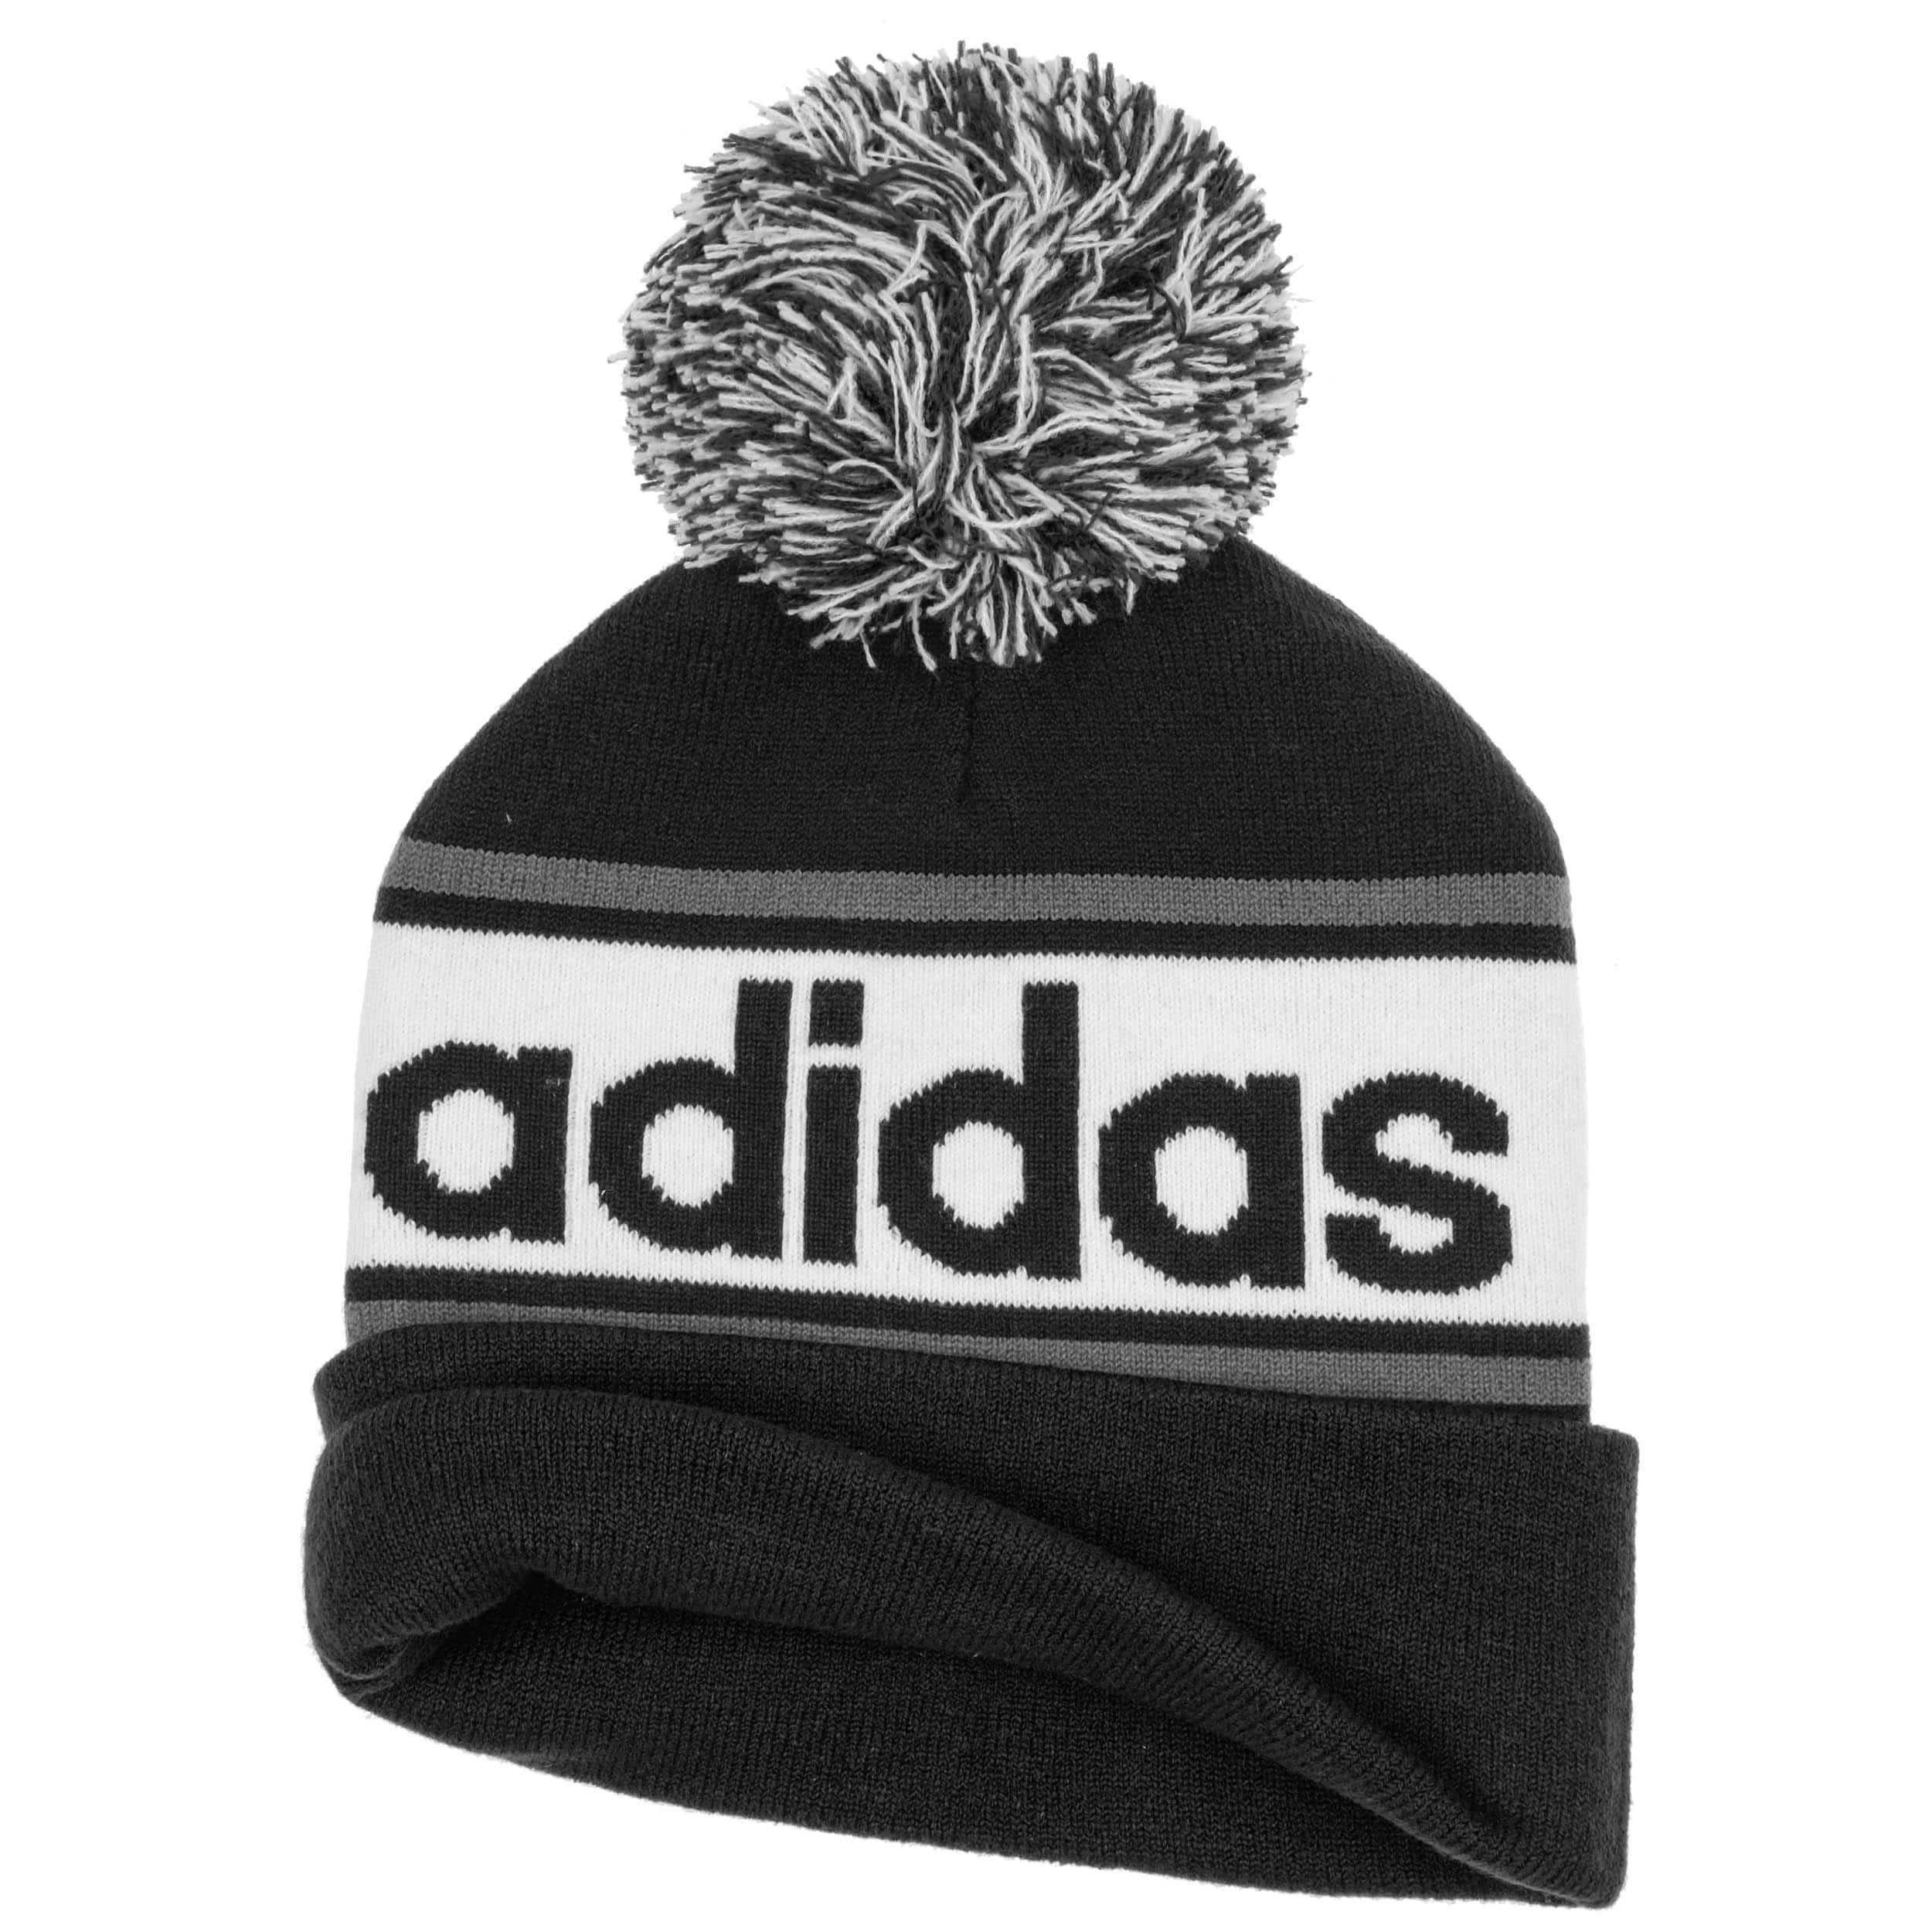 adidas wooly hat